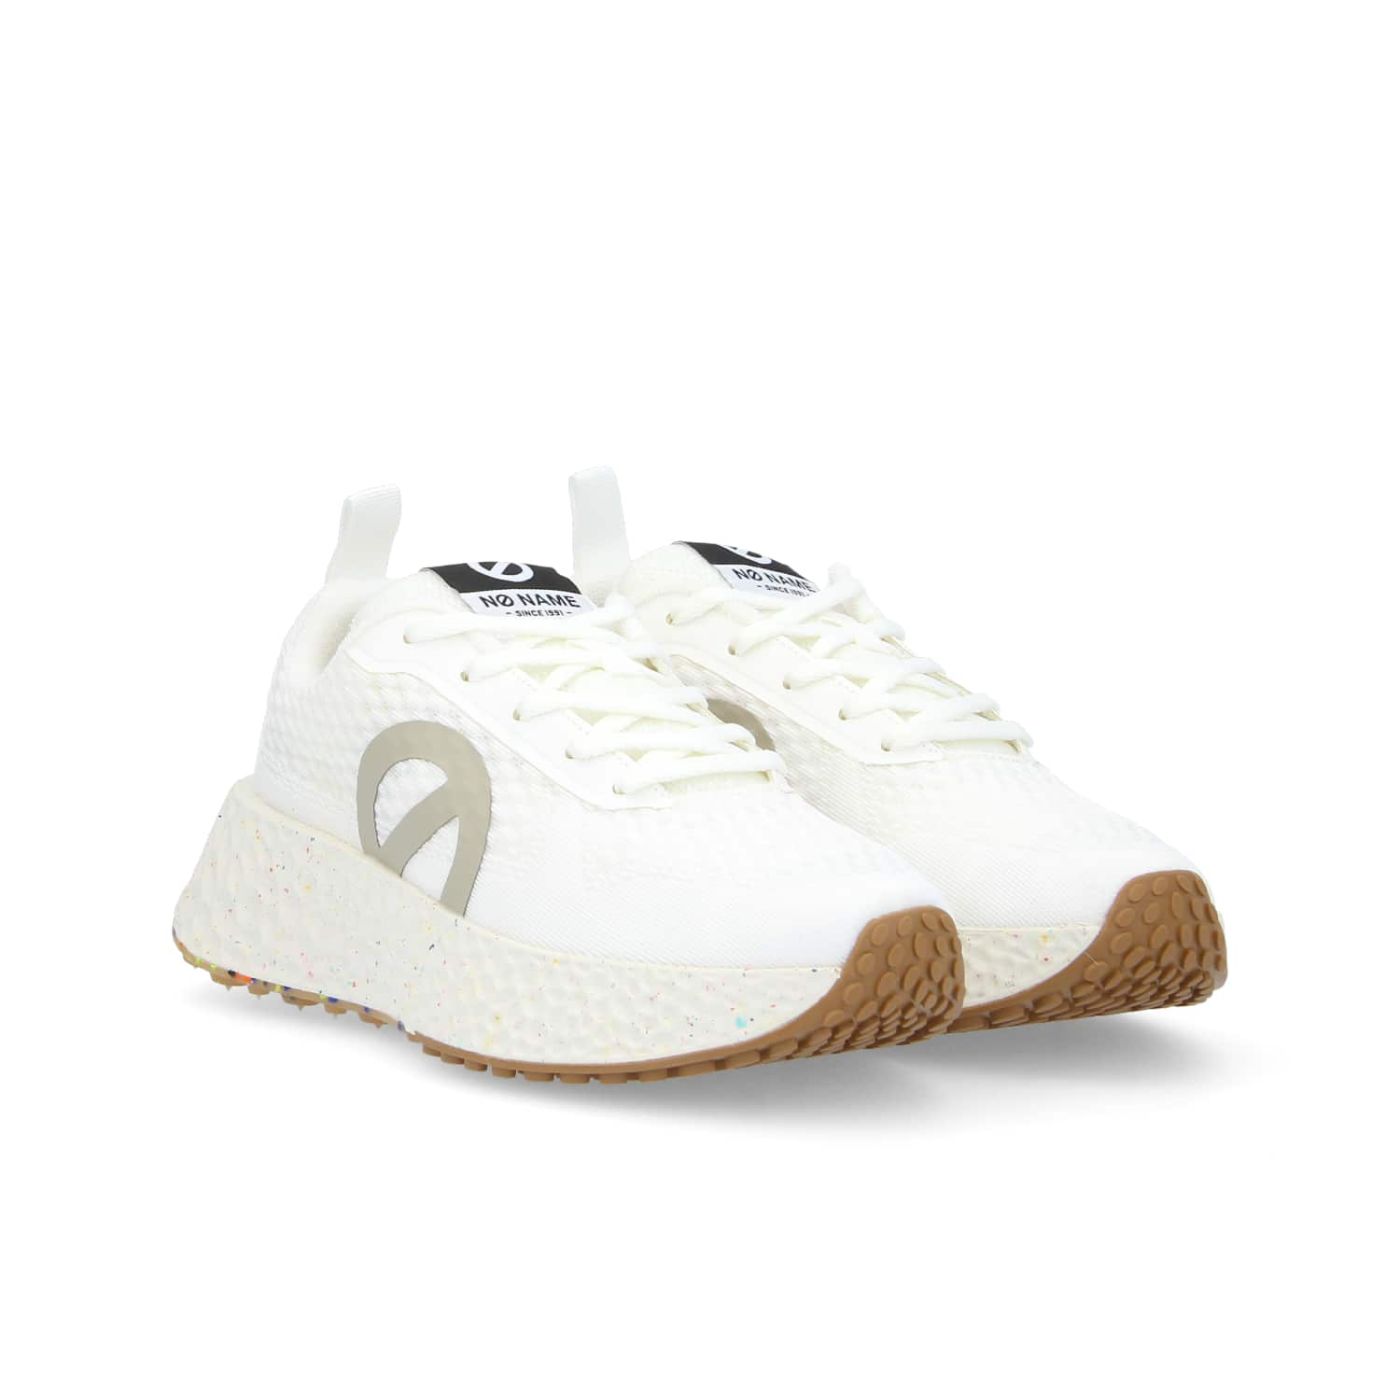 CARTER FLY M - MESH RECYCLED - WHITE/GREGE